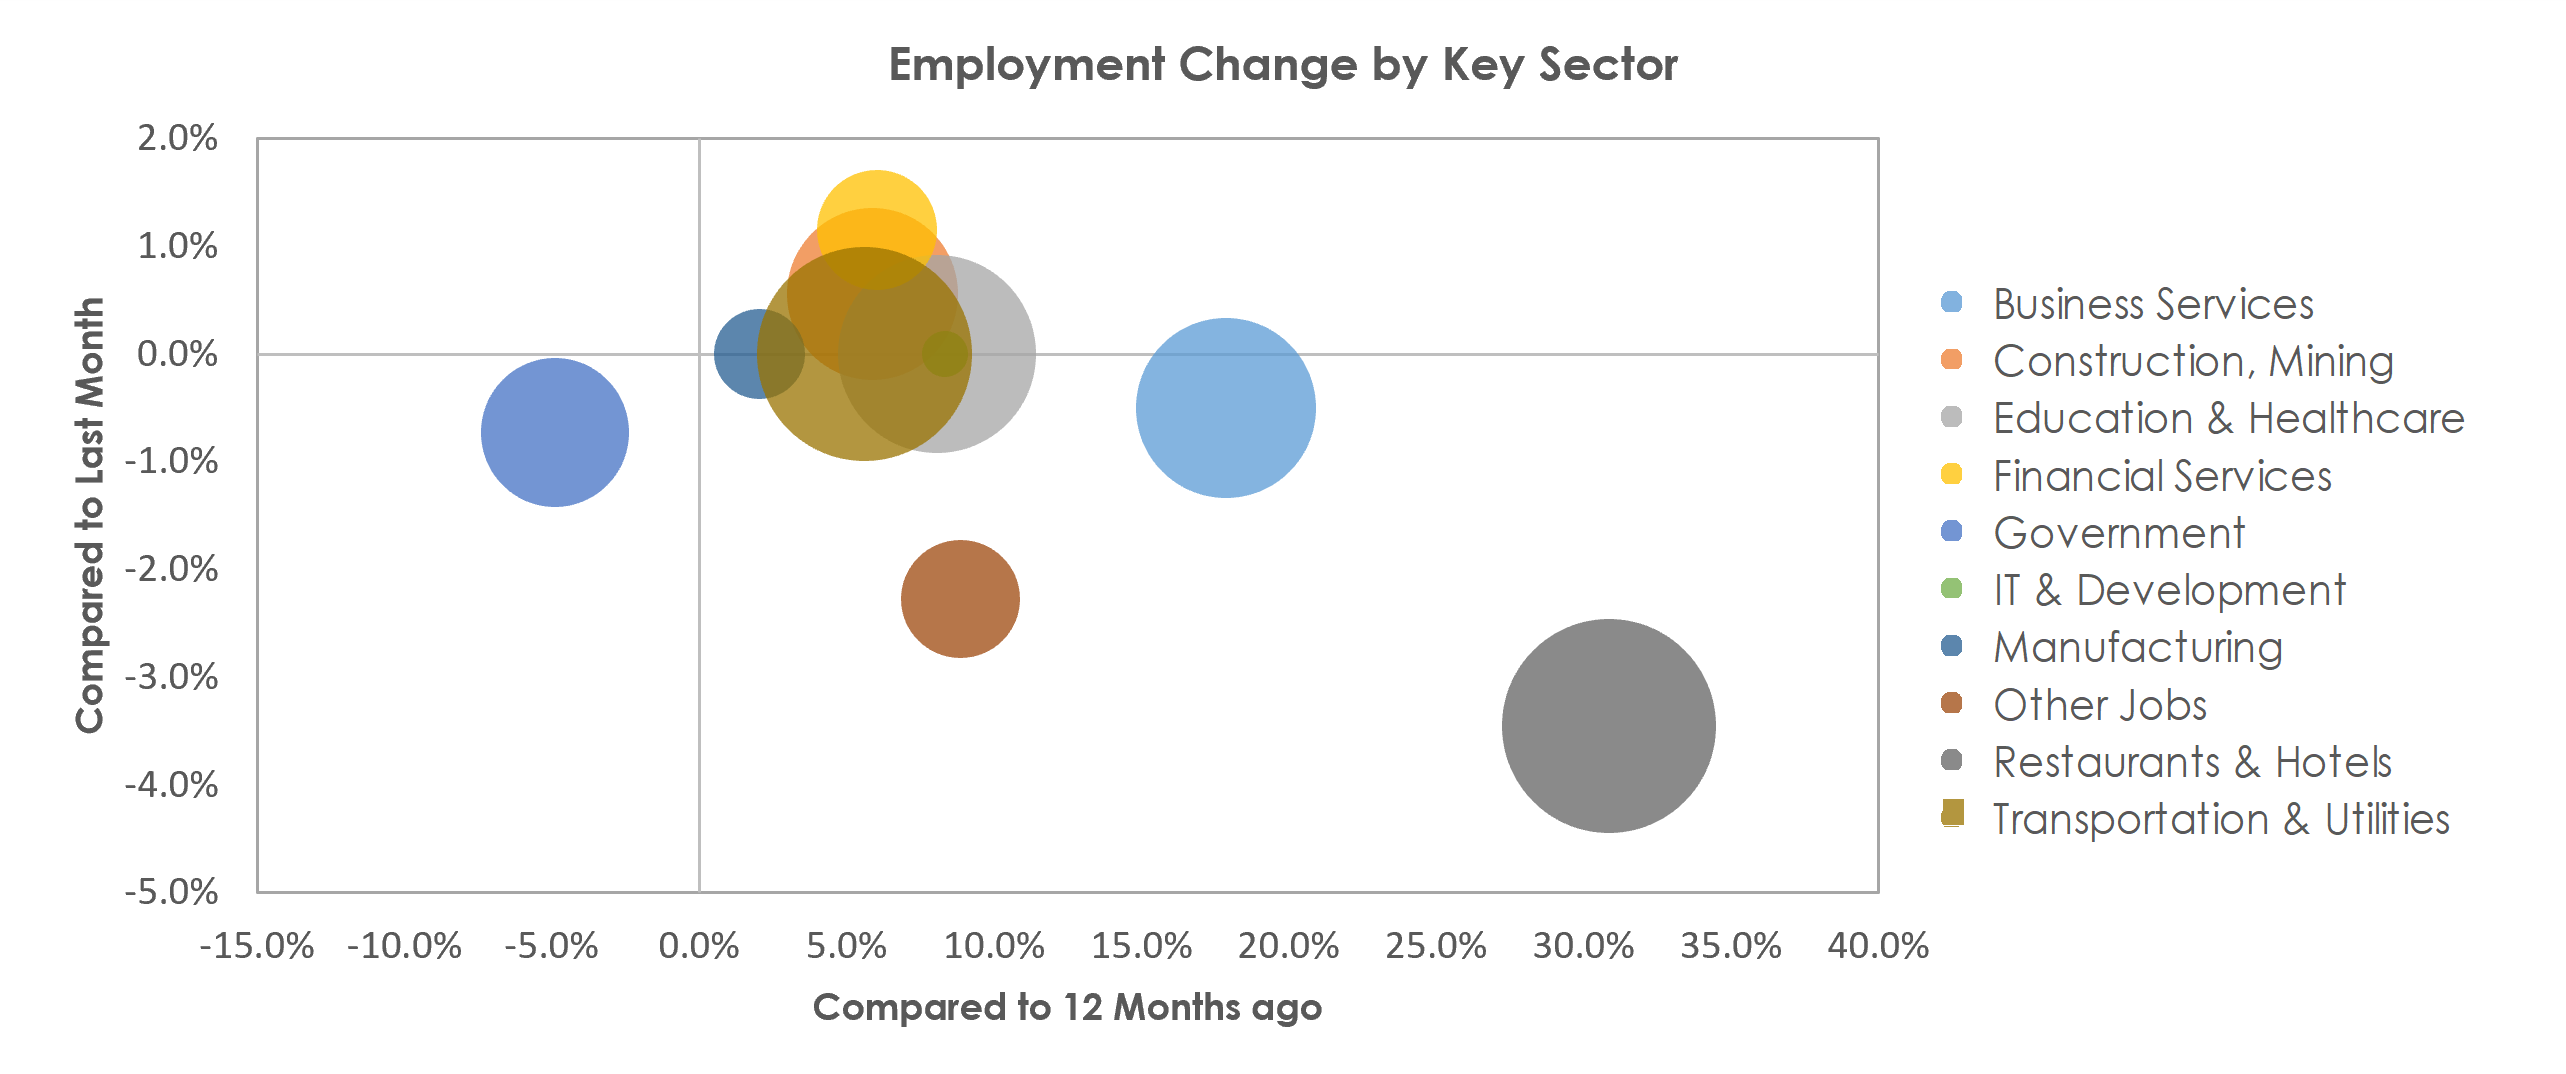 Naples-Immokalee-Marco Island, FL Unemployment by Industry May 2021